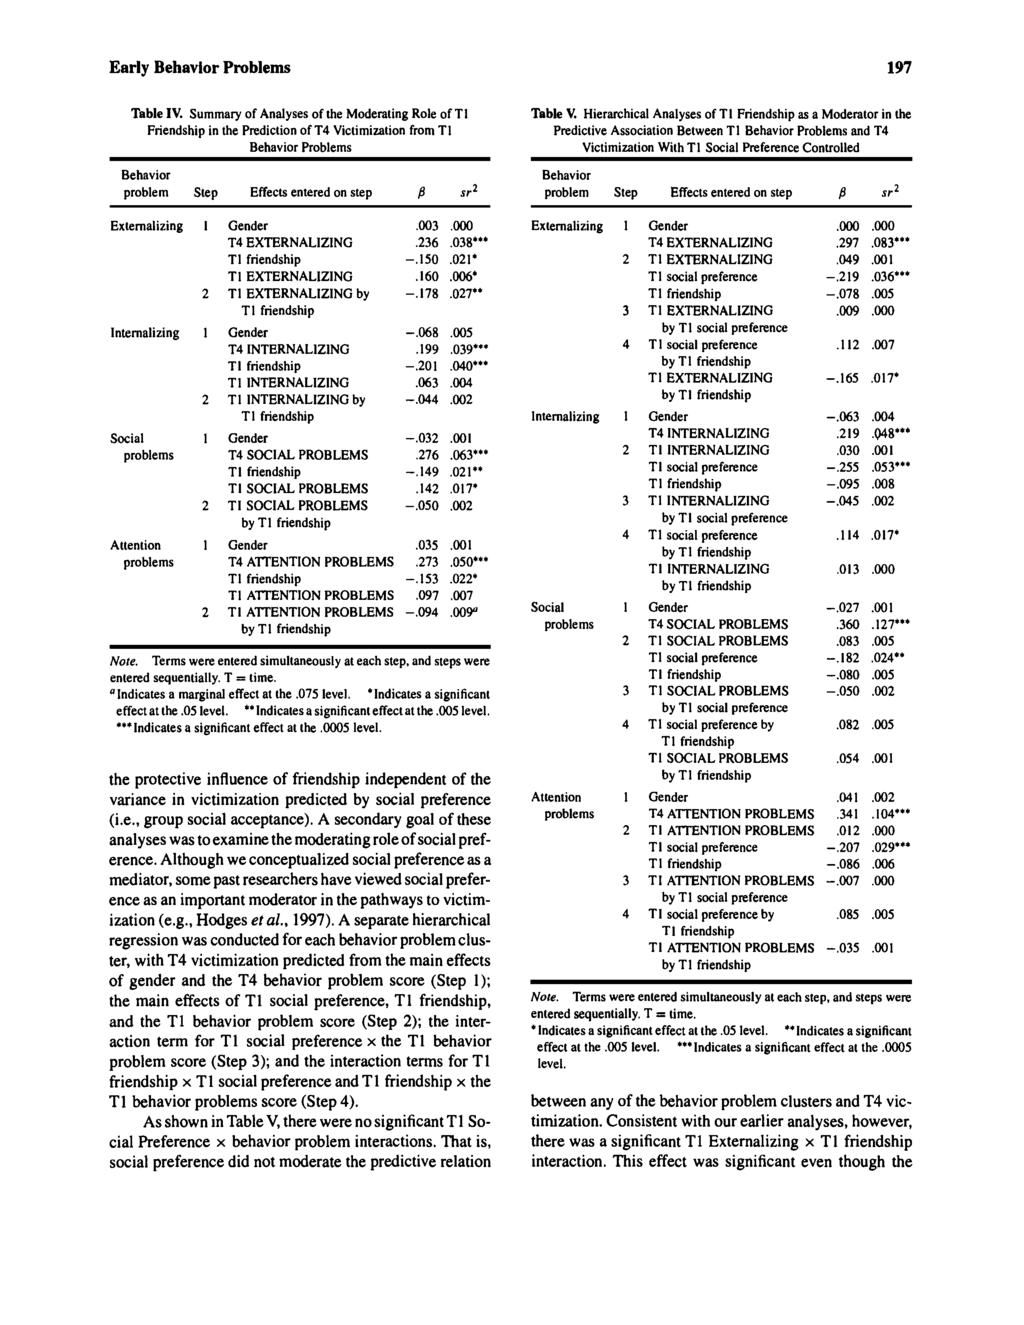 Early Behavior Problems 97 Table IV. Summary of Analyses of the Moderating Role of Friendship in the Prediction of Victimization from Behavior Problems Table V.